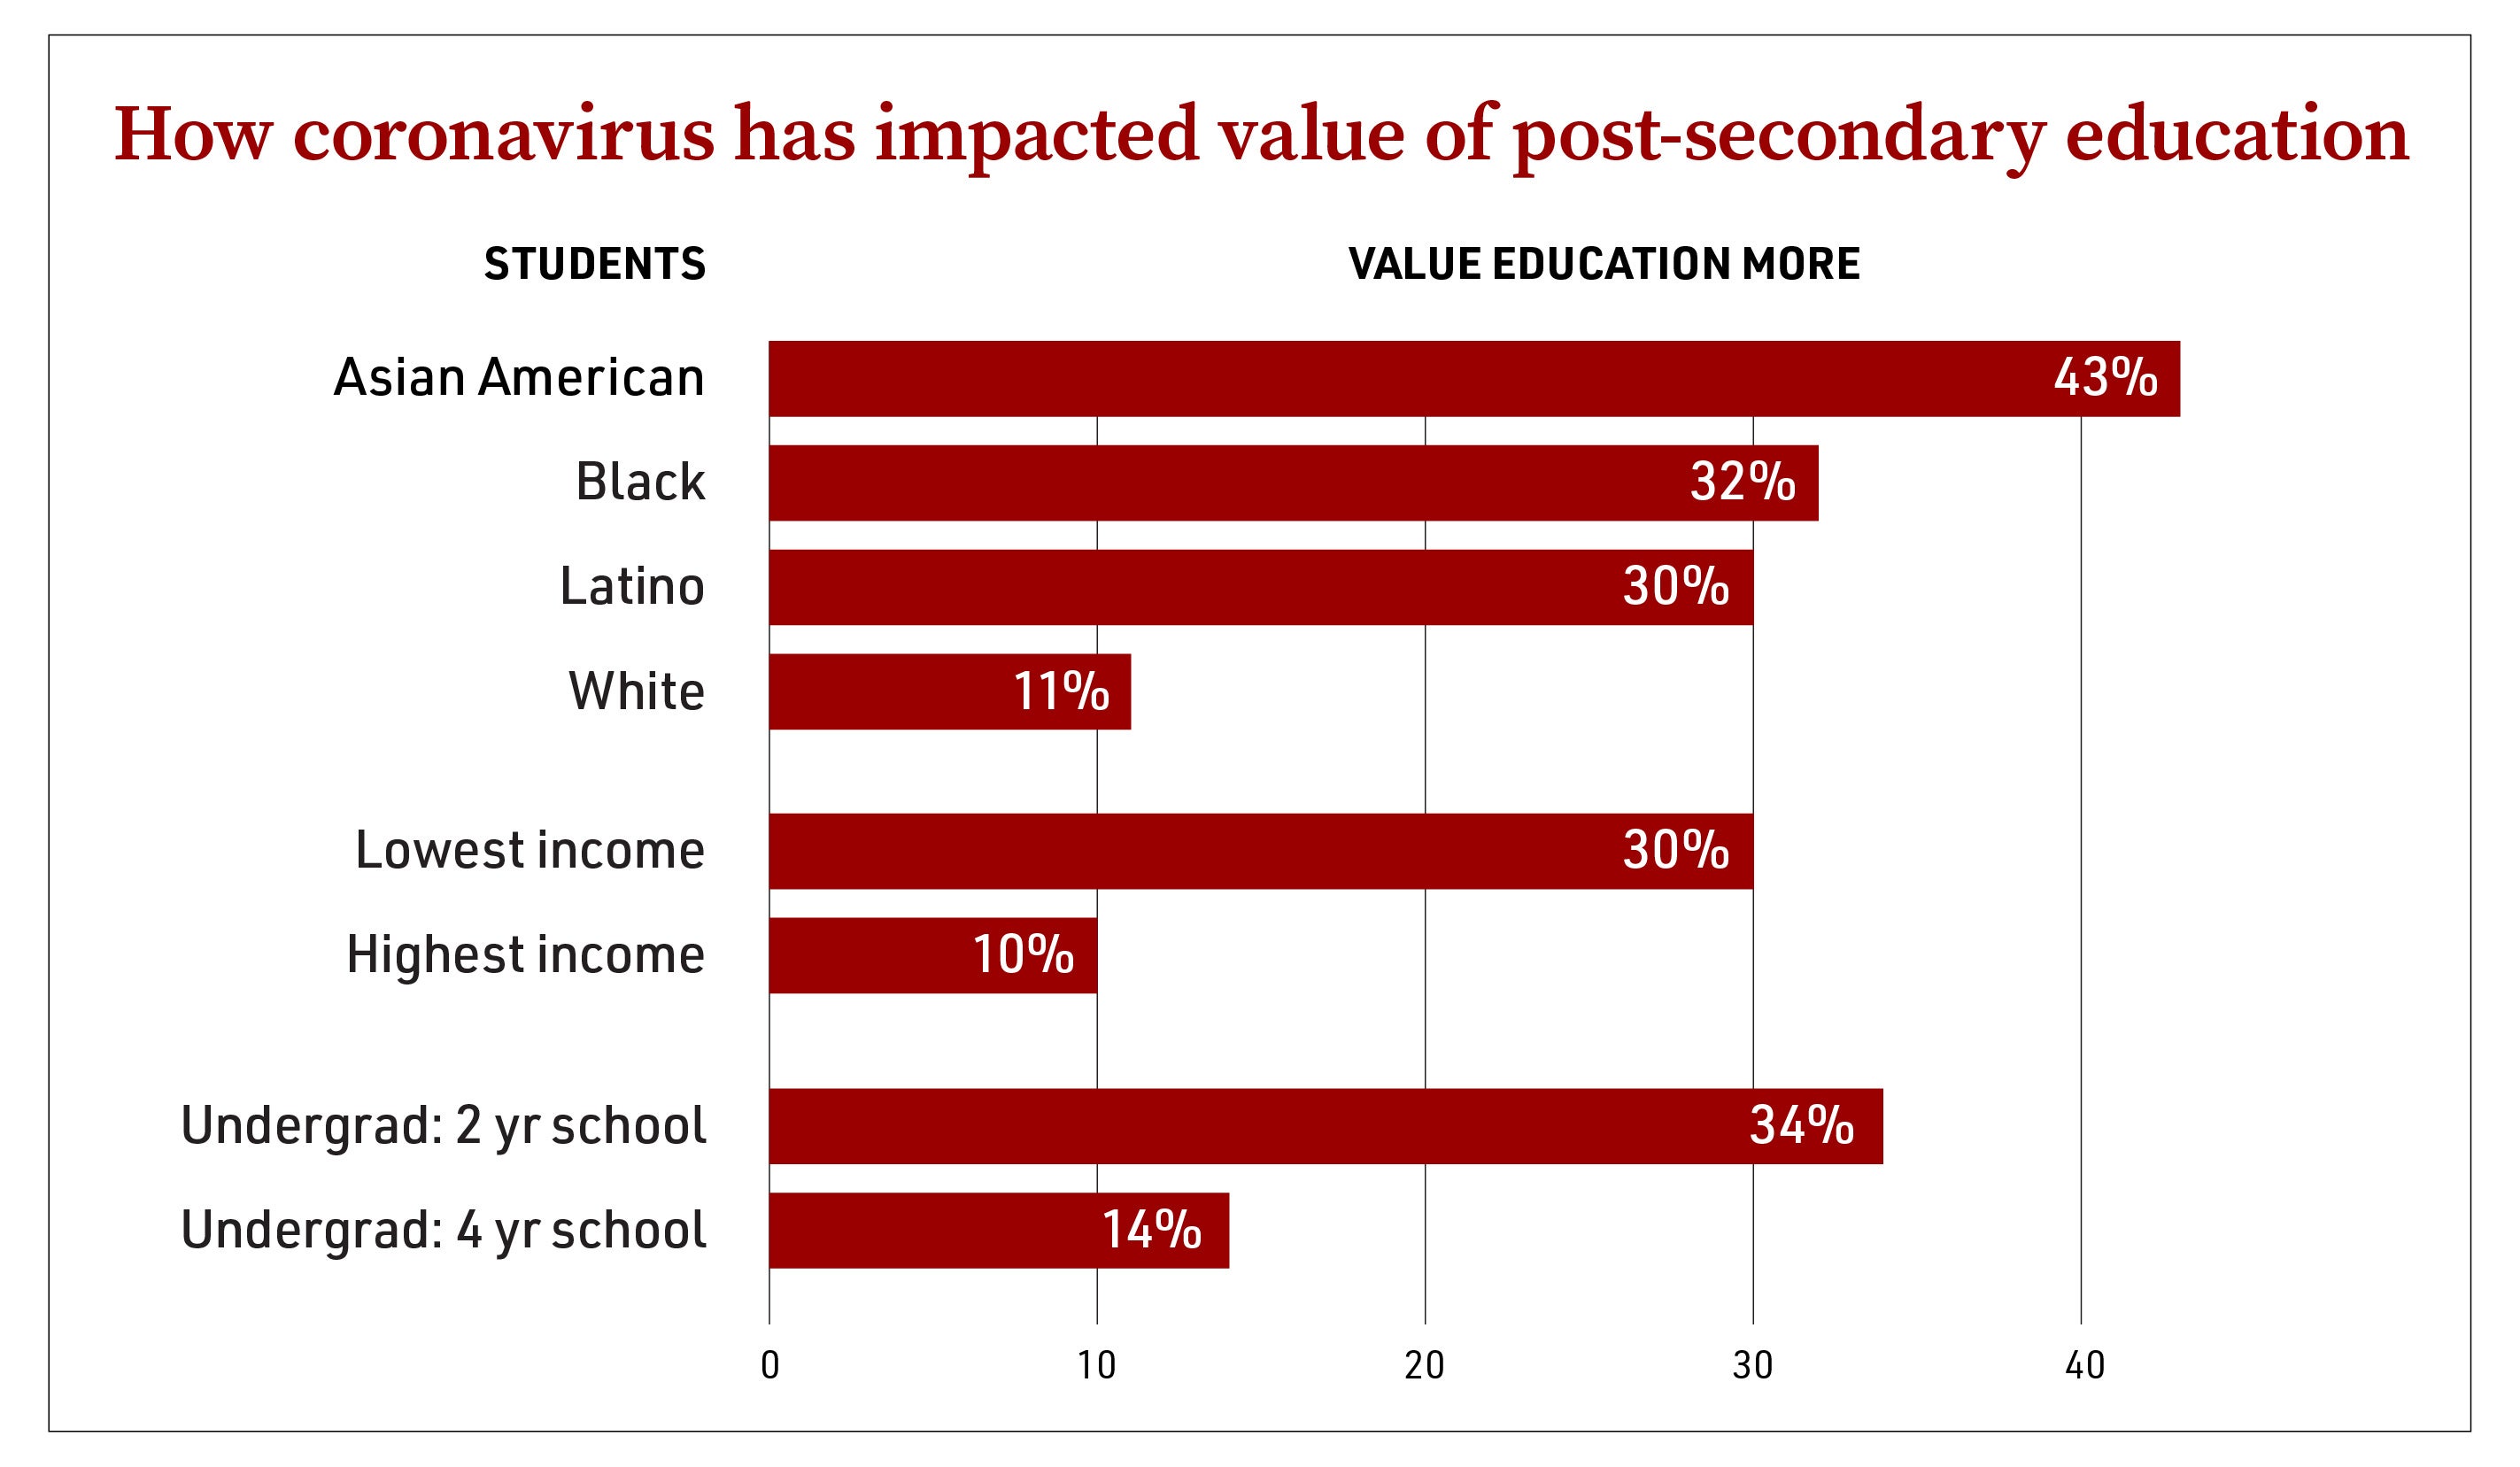 Chart comparing COVID-19's impact on perceived value of post-secondary education for students of different racial, income and educational levels.